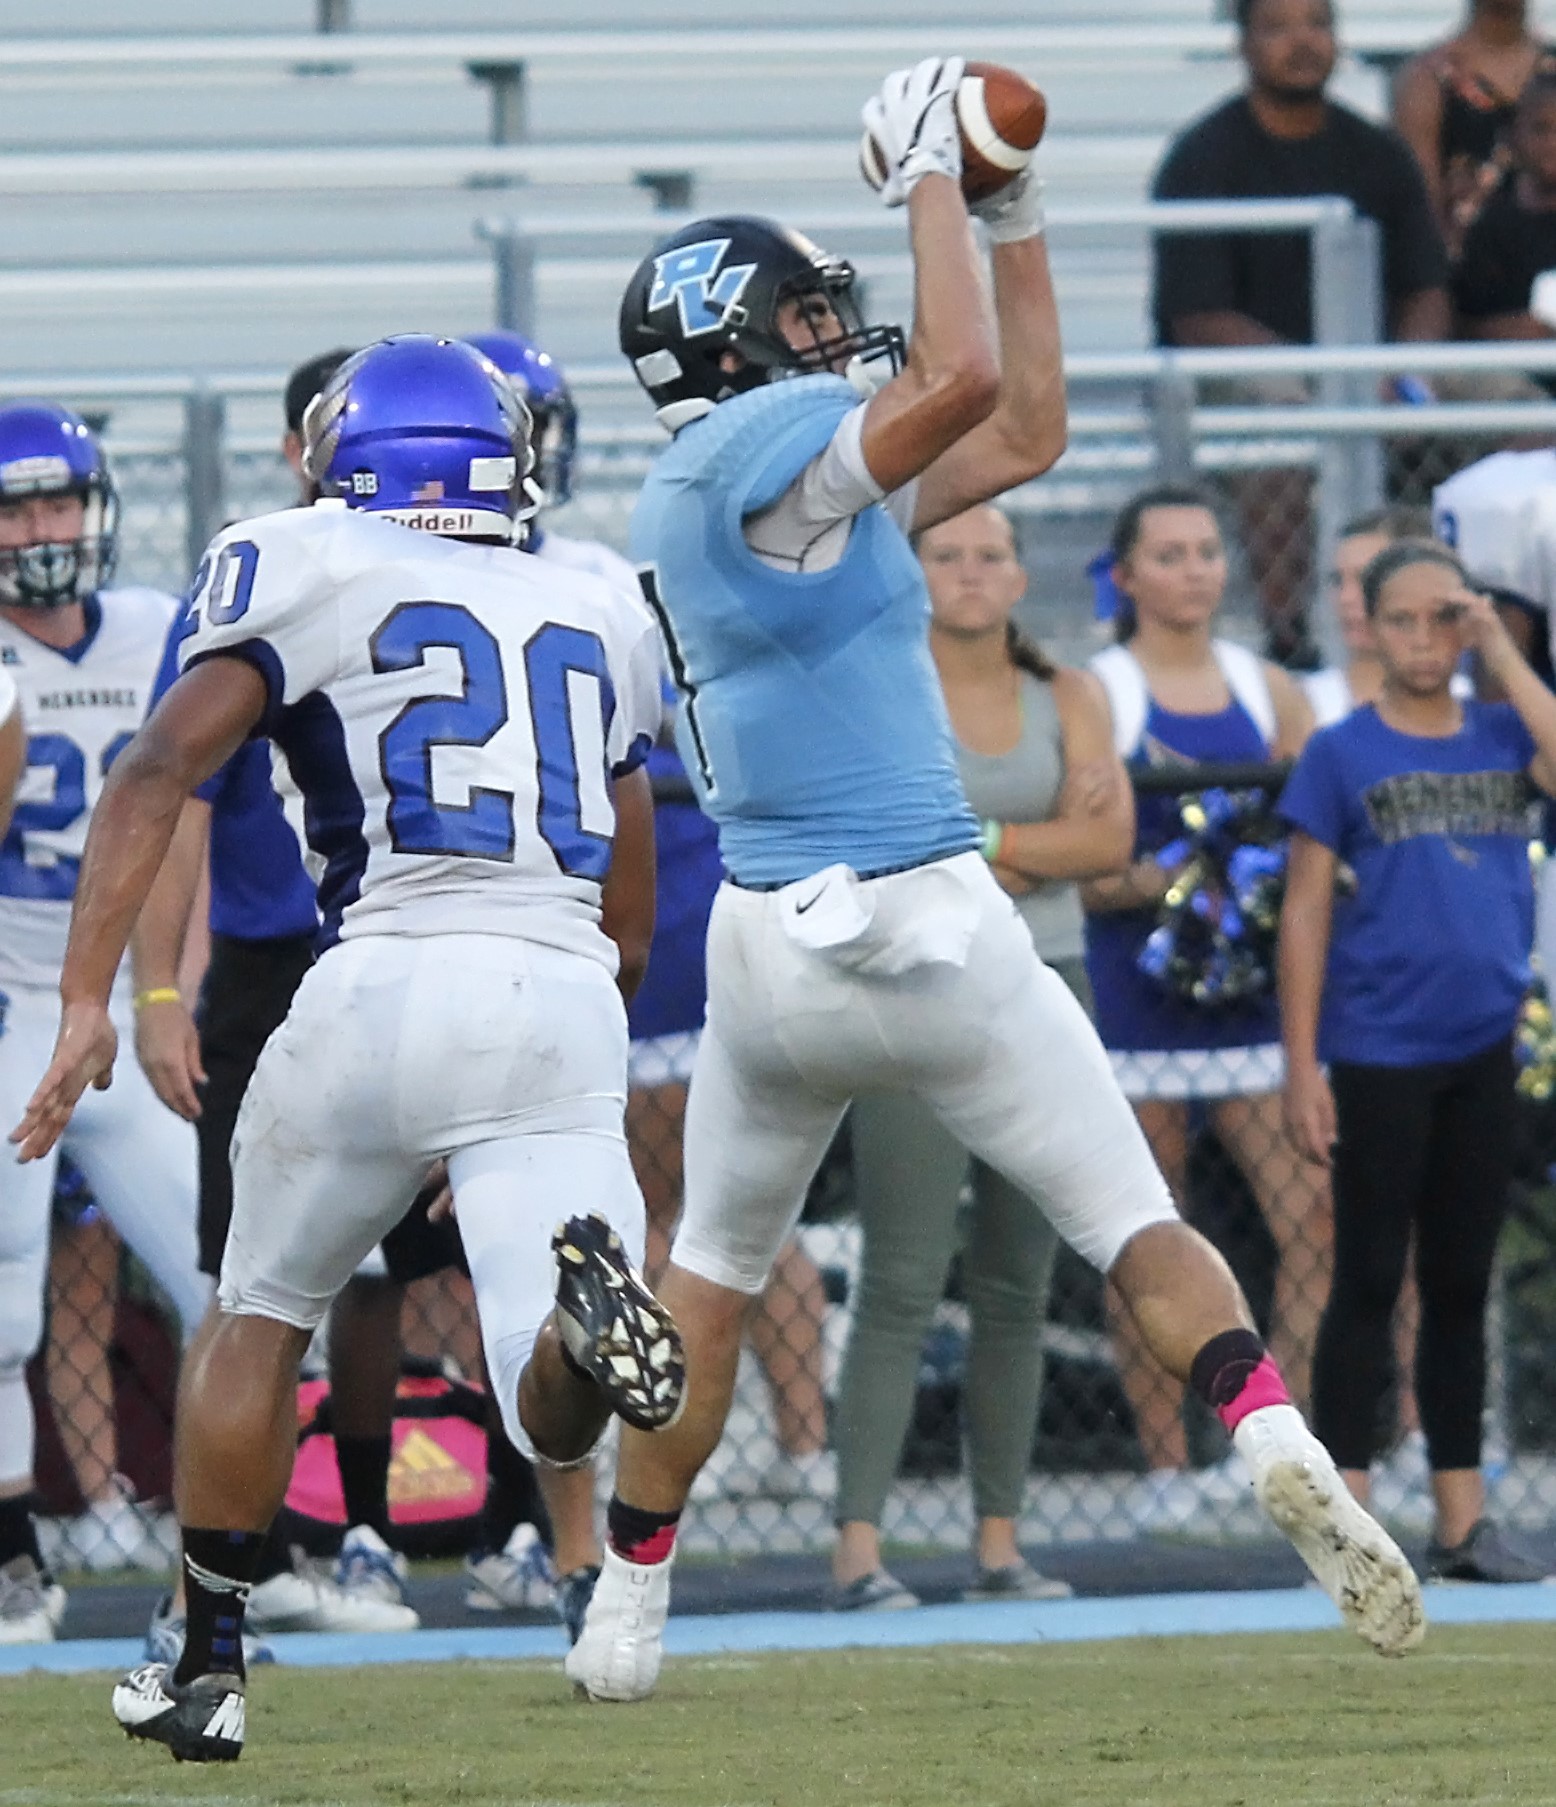 JD Piris makes a catch at the sidelines for a Sharks’ first down